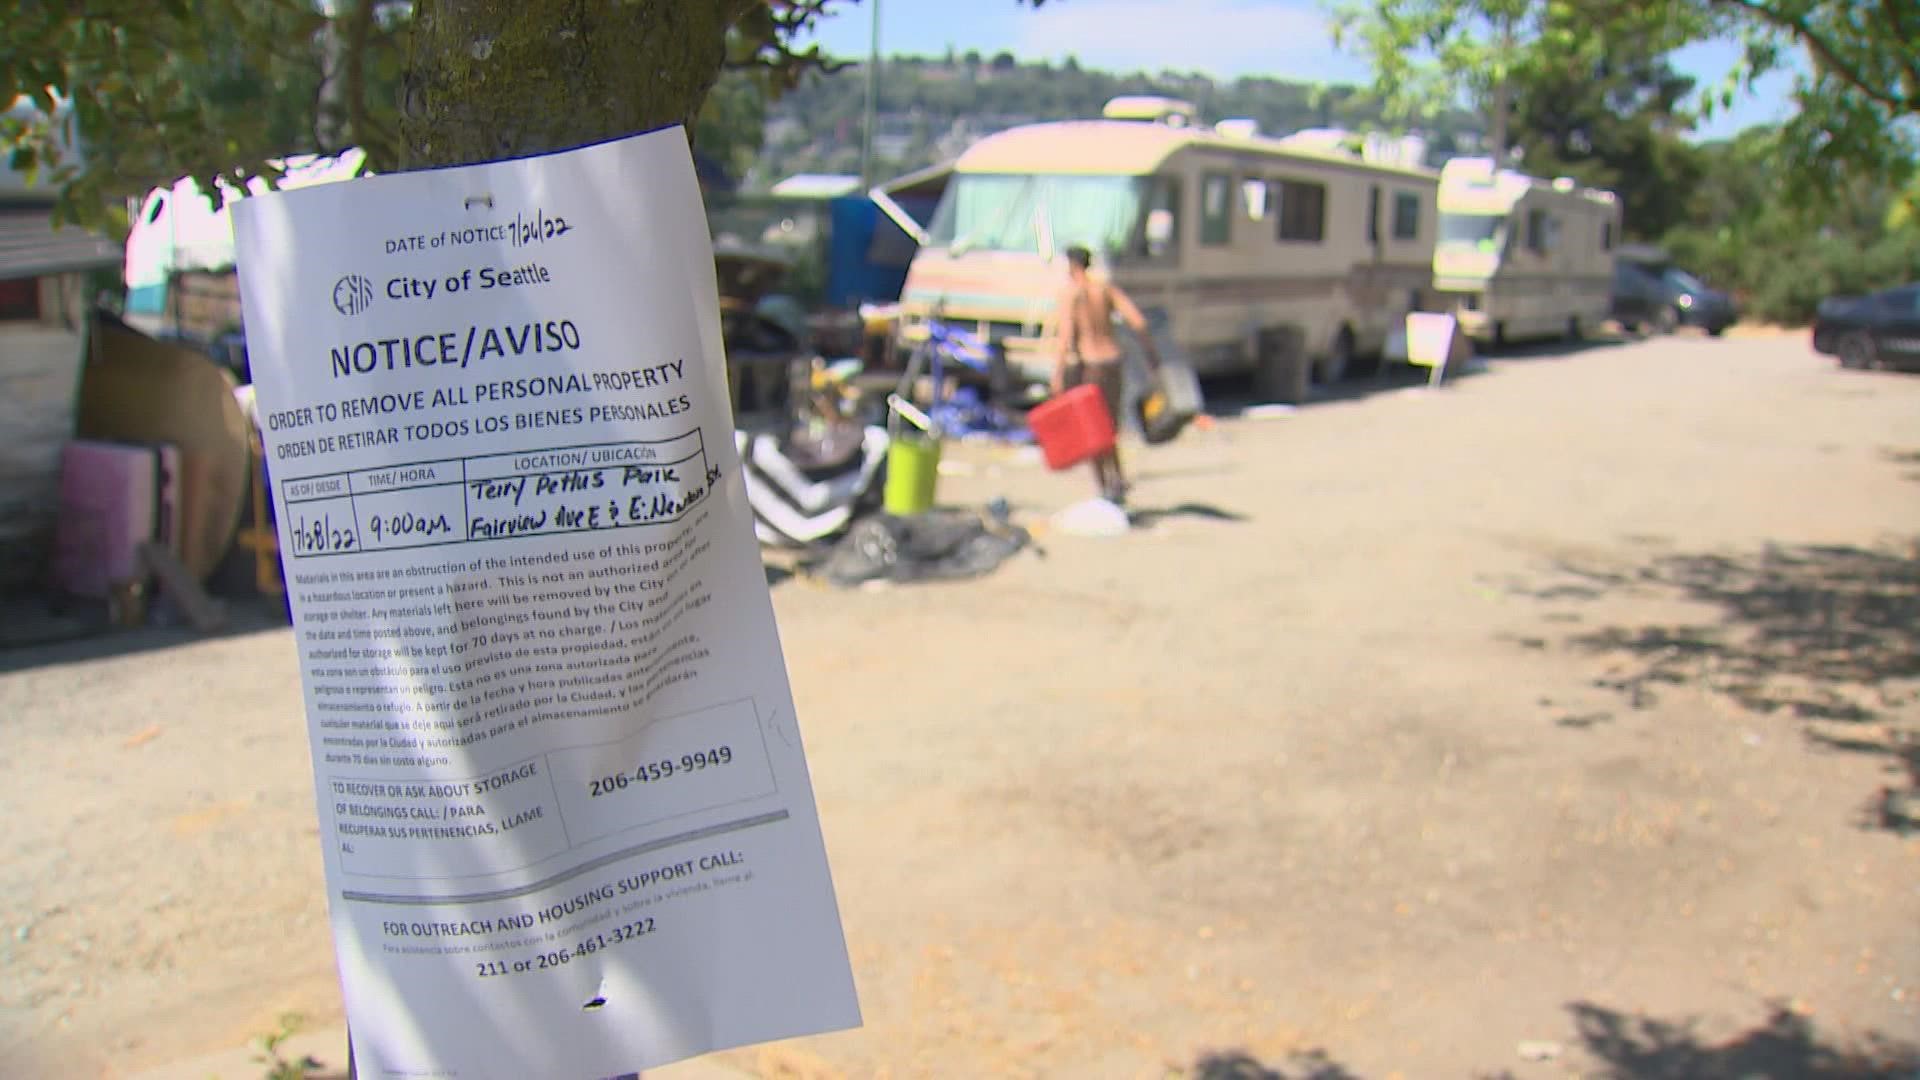 Homeless camp clear-outs are happening right now in Seattle, in the middle of this heat wave, with more to come tomorrow.